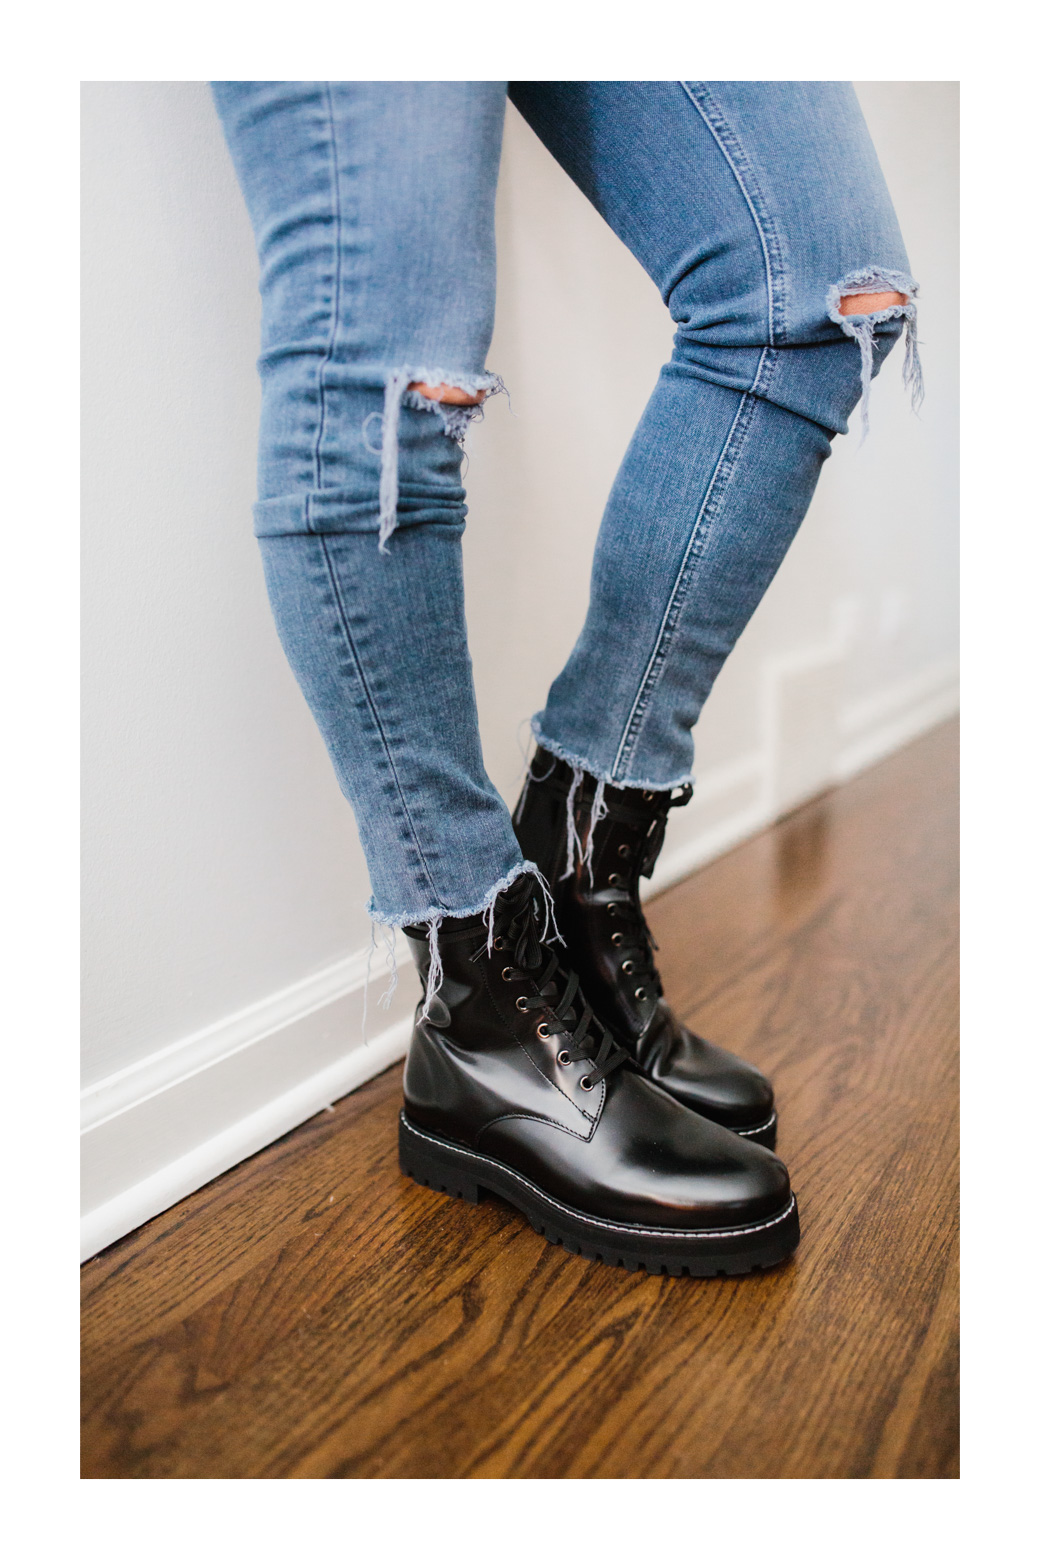 combat boots and jeans